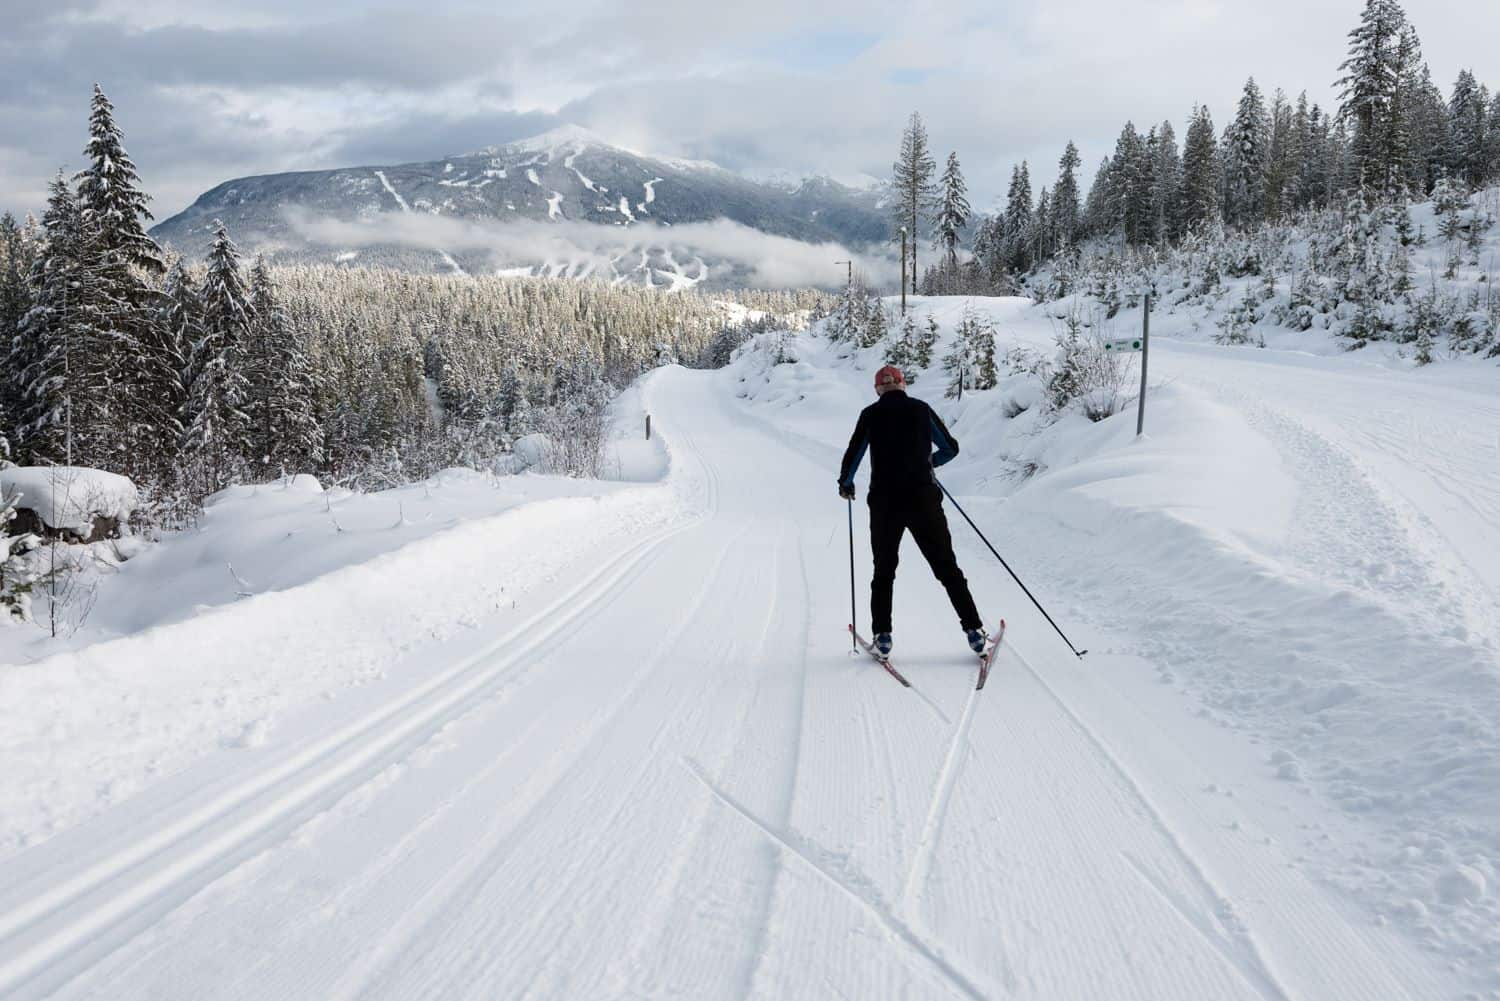 nordic skiing with revelstoke resort view in background